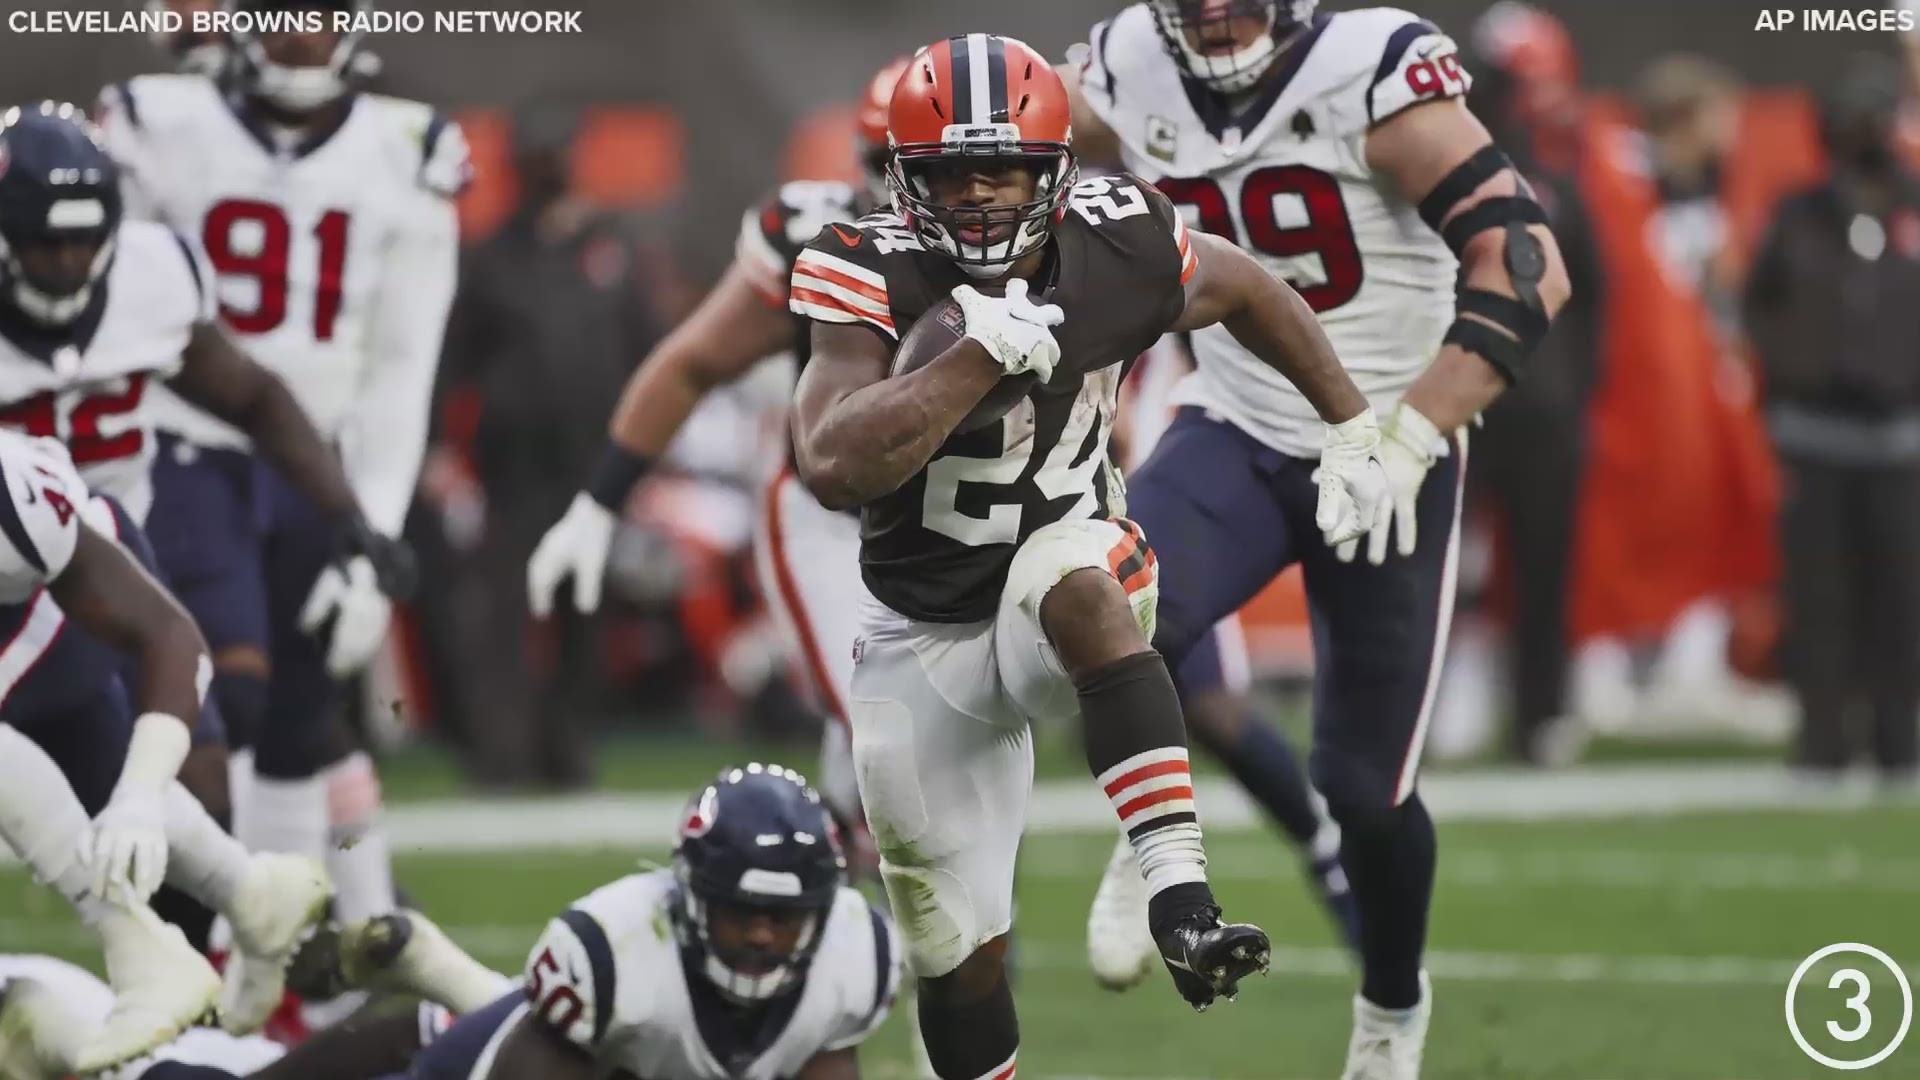 Nick Chubb gave the Cleveland Browns a 10-0 lead with a 9-yard rushing touchdown vs. the Houston Texans on Sunday.